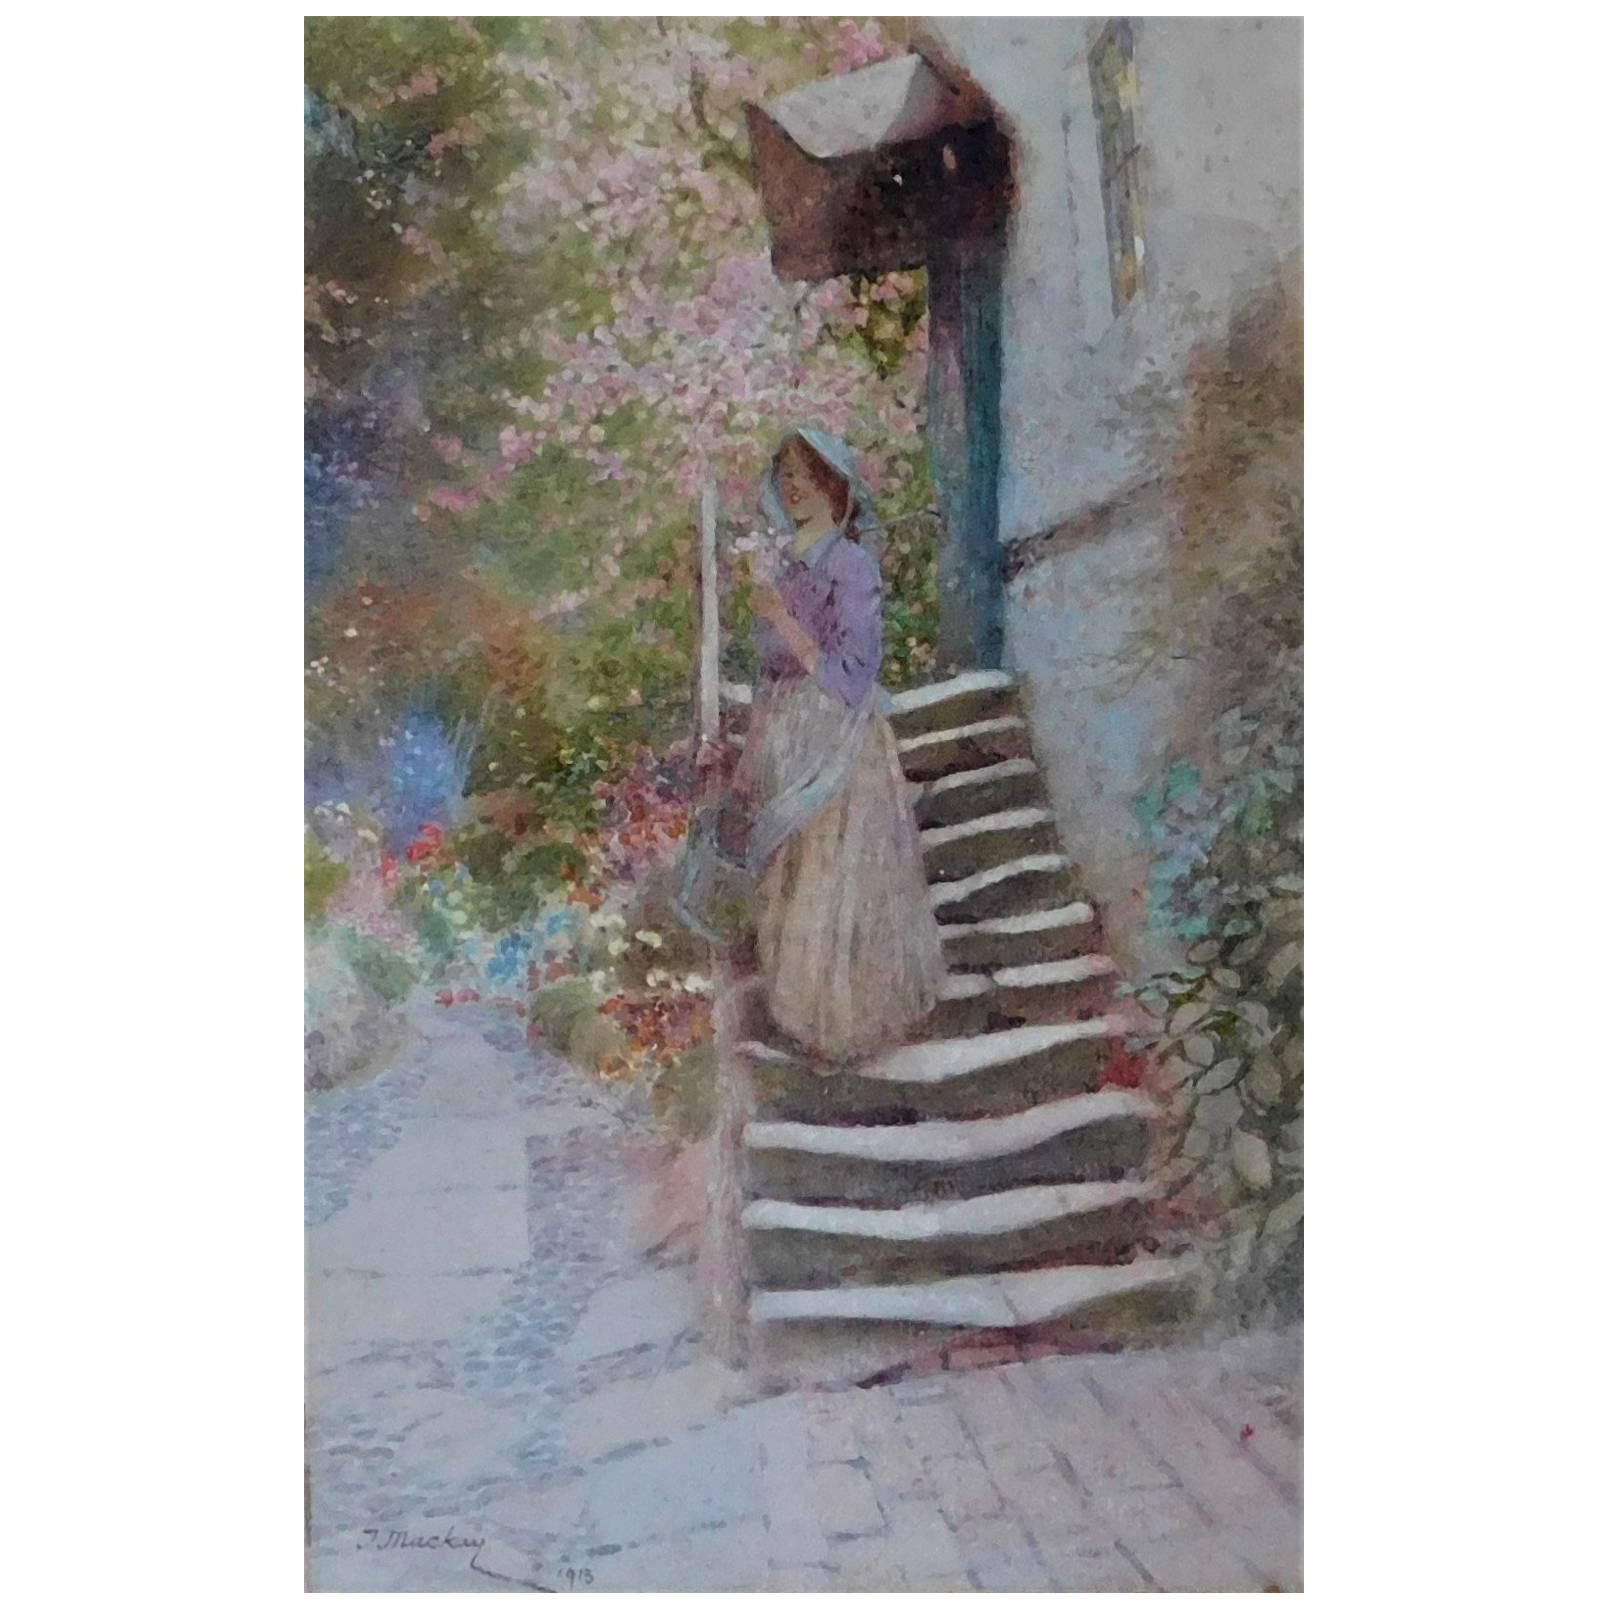 Thomas Mackay 1913 Watercolor Painting "Woman on Stairs"